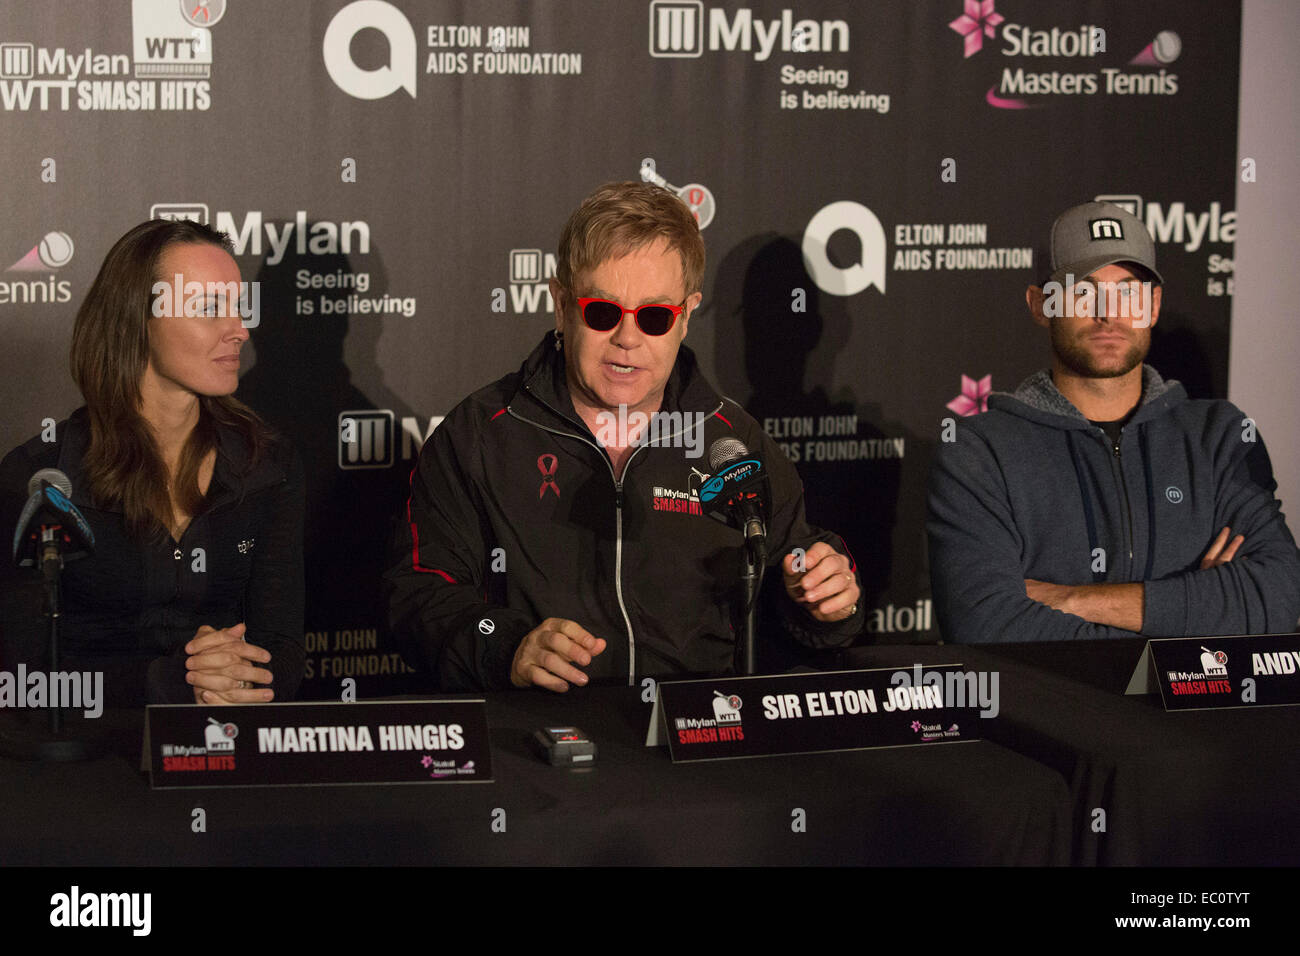 London, UK. 7 December 2014. Press conference led by Billie Jean King and Sir Elton John ahead of the tennis matches of the 22nd Mylan World Team Tennis Smash Hits at the Royal Albert Hall, London. Event participants include Andy Roddick, Tim Henman, Kim Clijsters, Sabine Lisicki, John McEnroe, Jamie Murray, Heather Watson and Martina Hingis. The event raises money for the Elton John Aids Foundation (EJAF). The event takes place during Statoil Masters Tennis. Credit:  Nick Savage/Alamy Live News Stock Photo